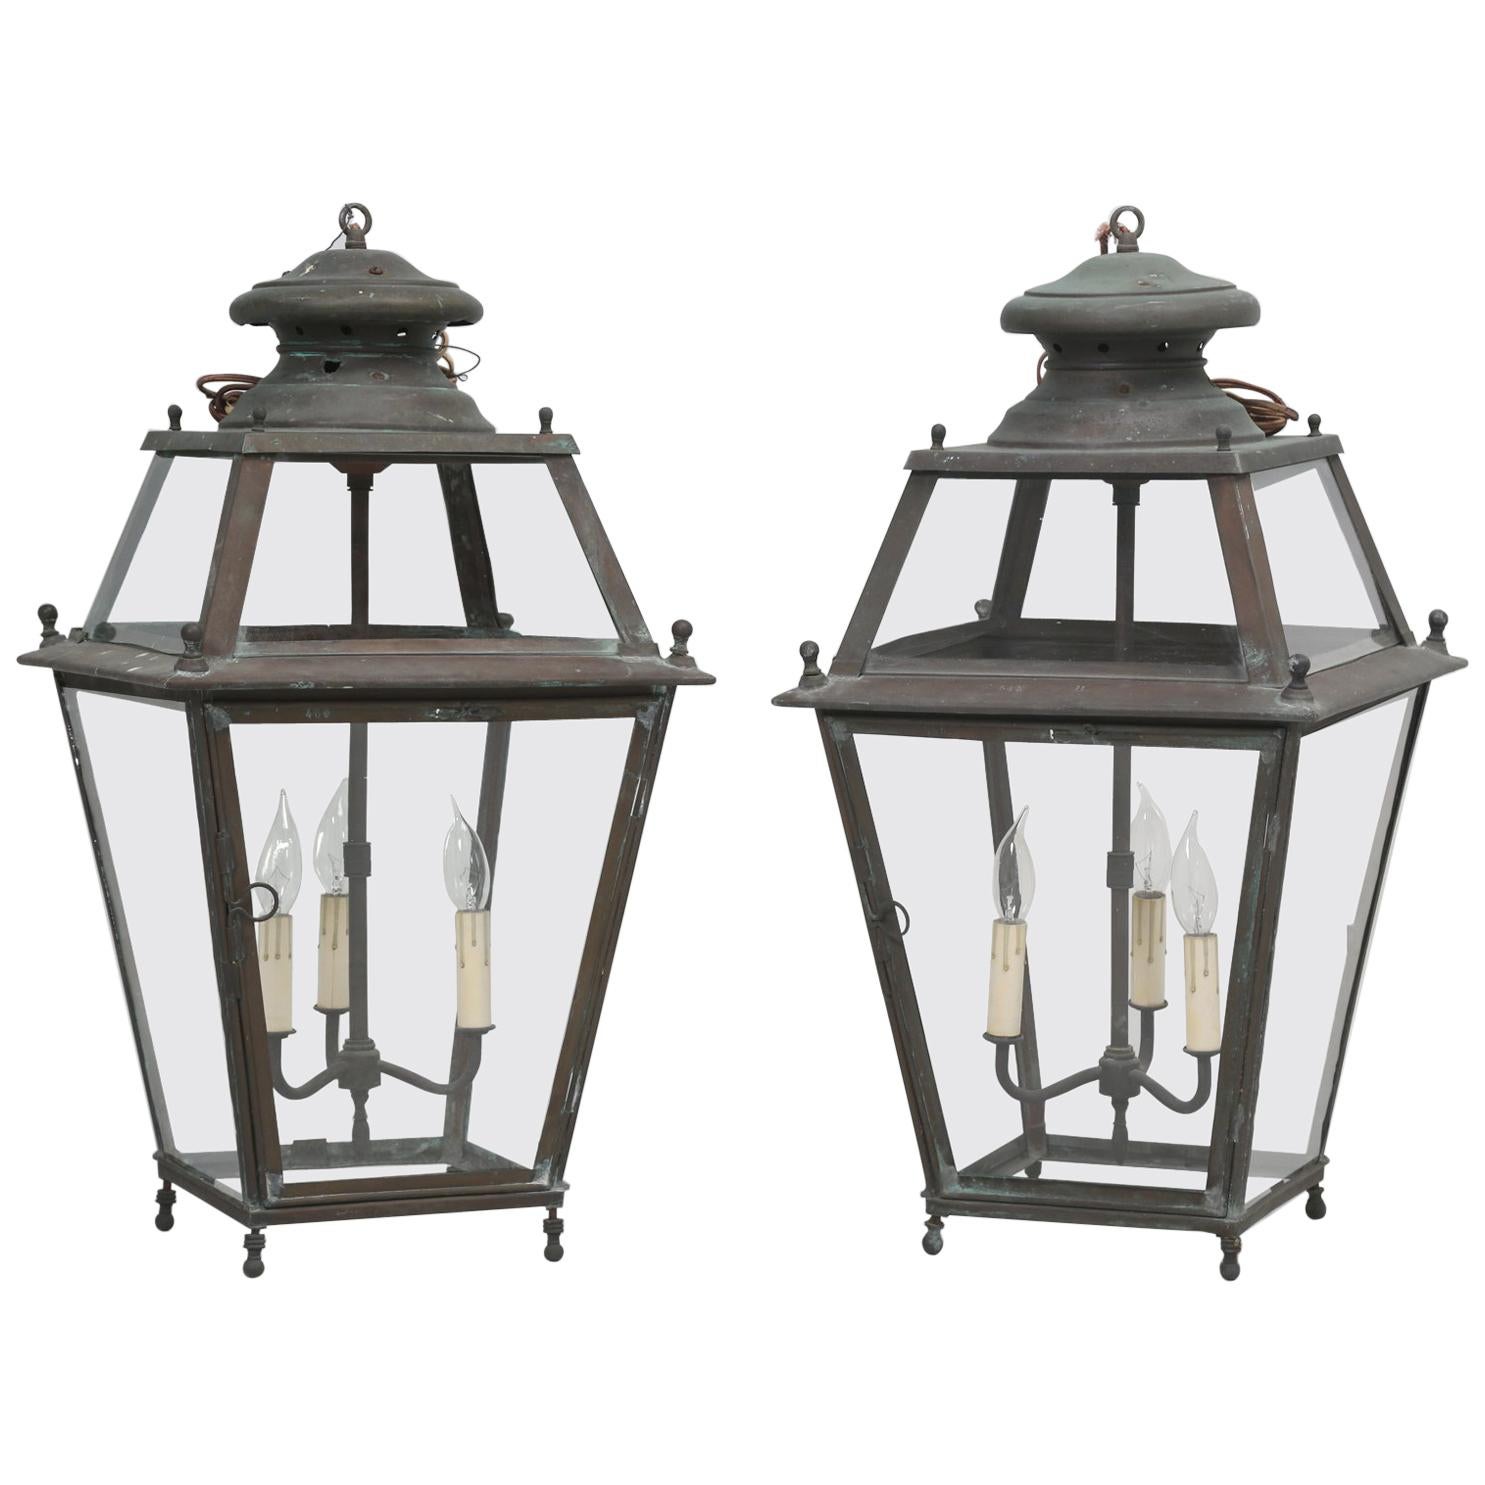 Pair of Old Copper French Lanterns with Wavy Glass Panes, Rewired